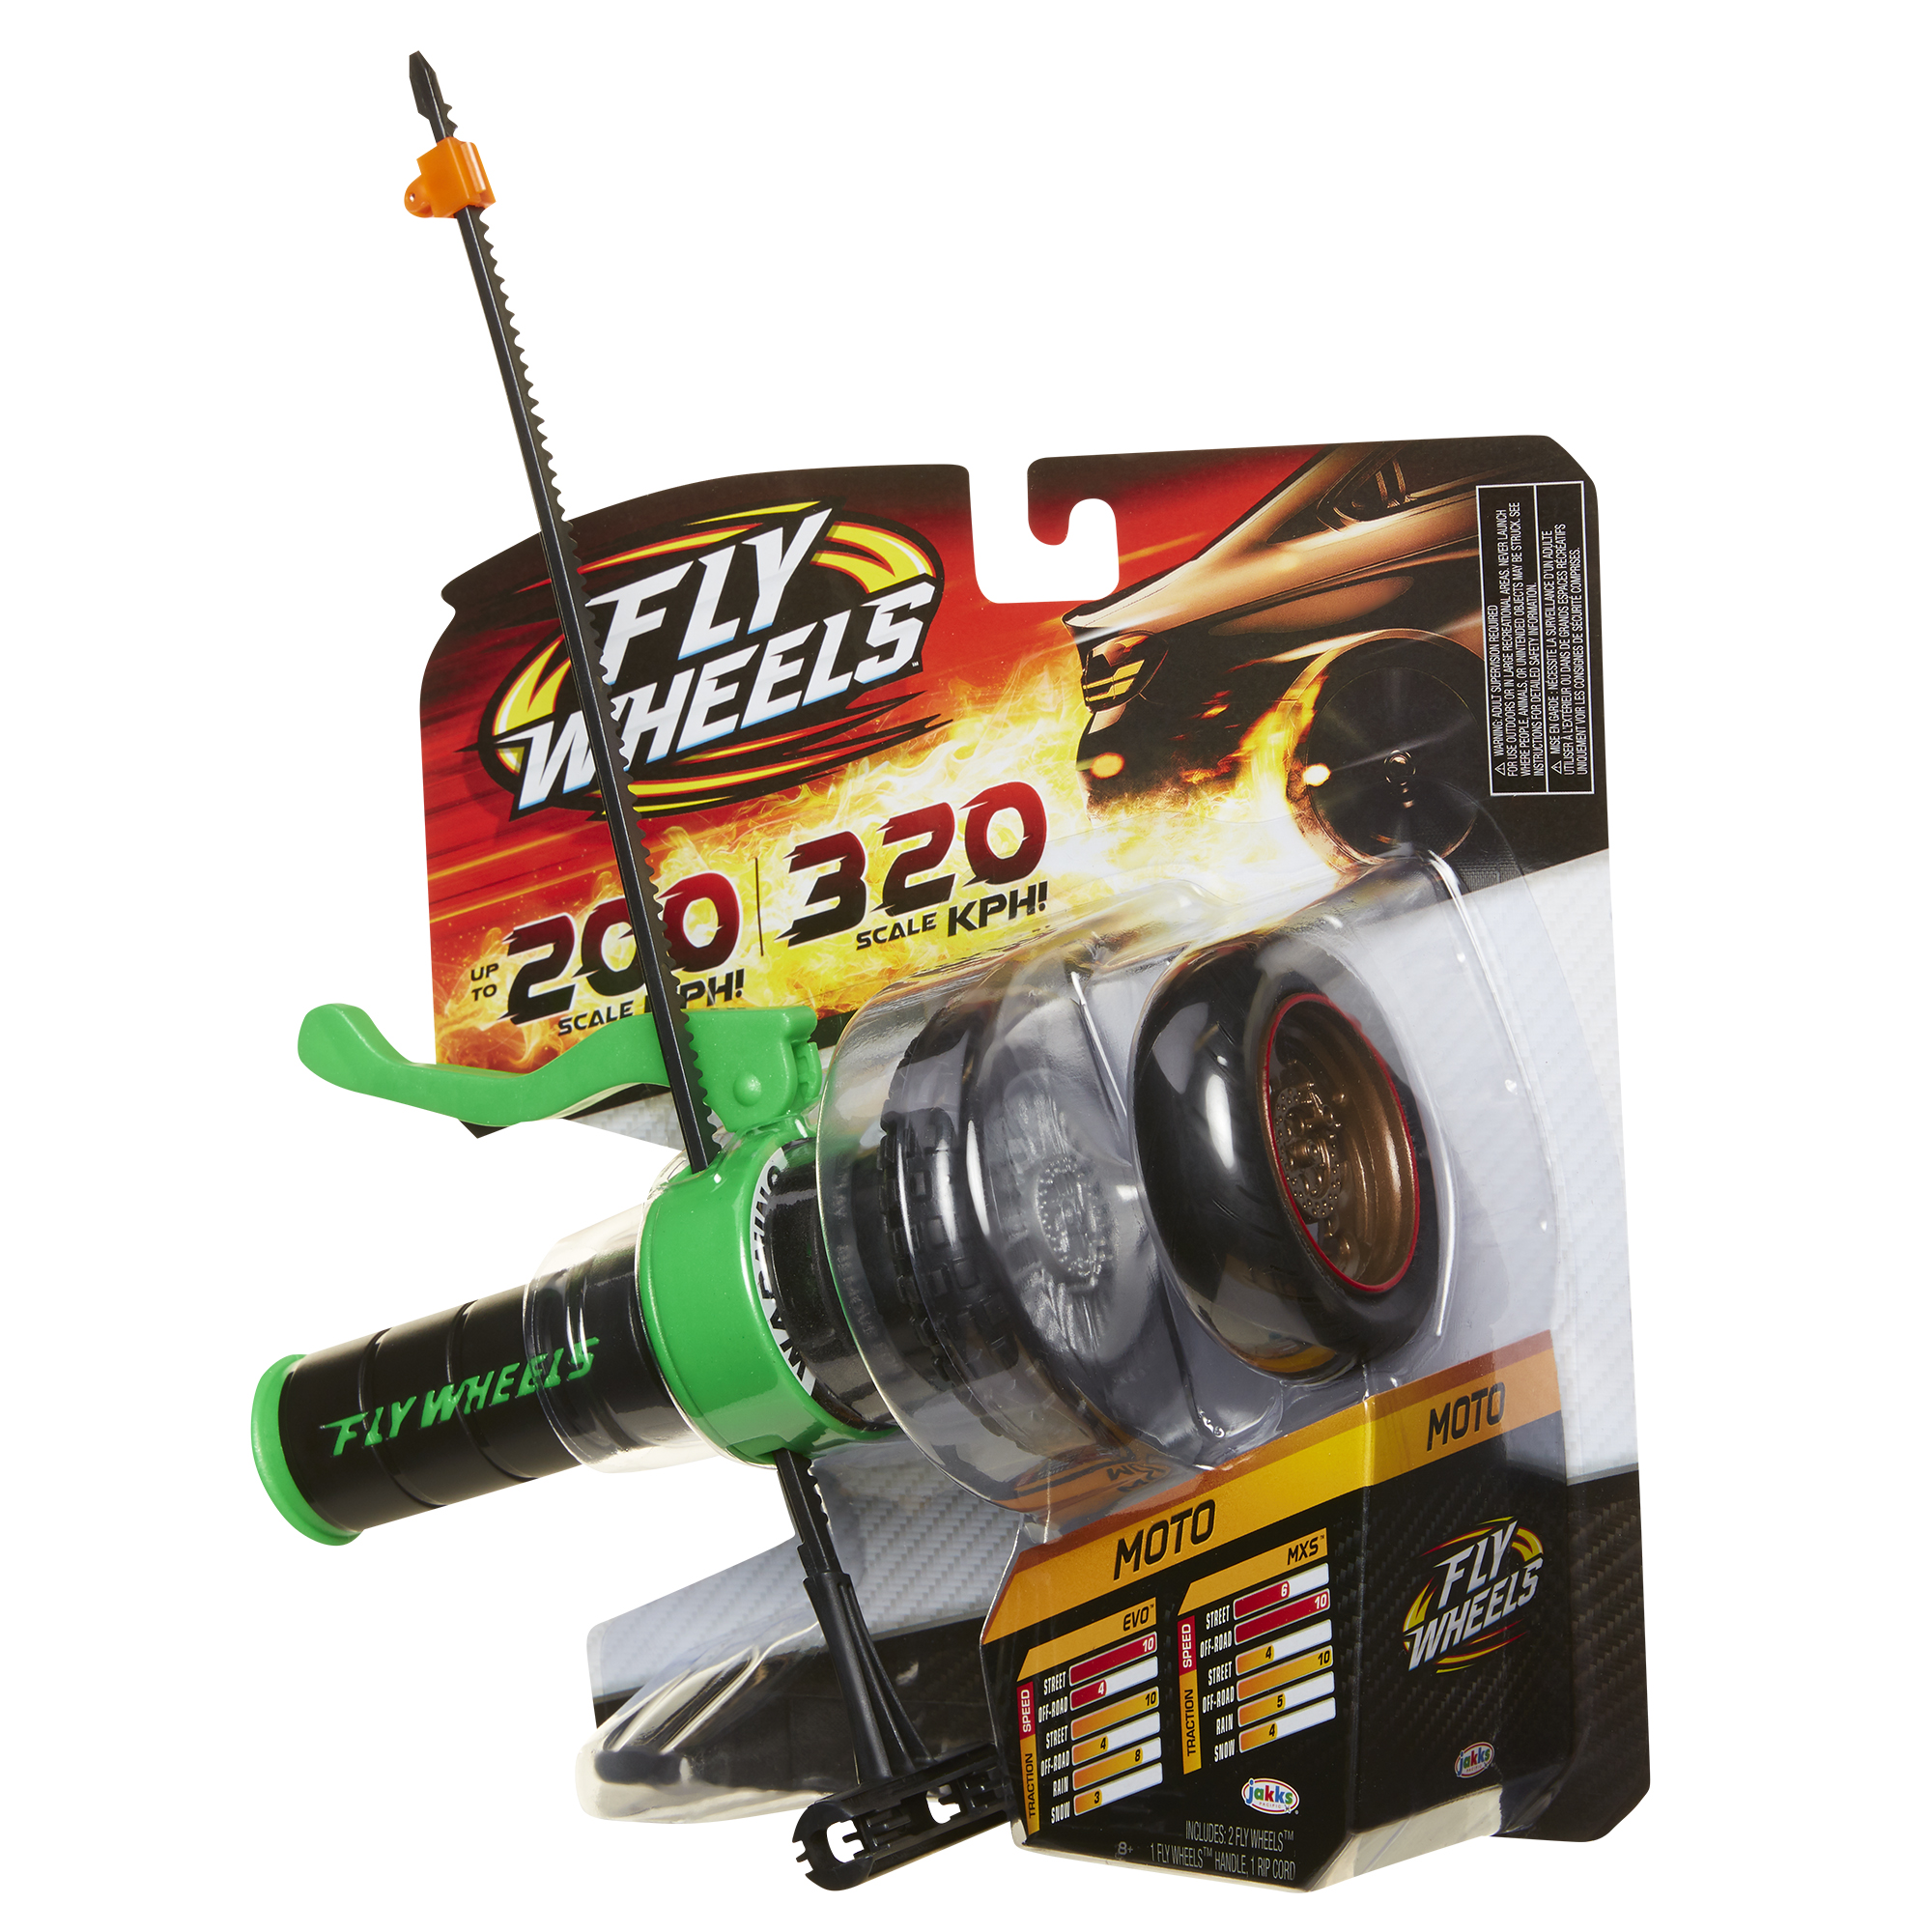 Fly Wheels Launcher + 2 2 Moto Wheels - Rip it up to 200 Scale MPH, Fast Speed, Amazing Stunts & Jumps up to 30 feet! All Terrain Action: dirt, mud, water, snow- One of the hottest wheels around! - image 1 of 6